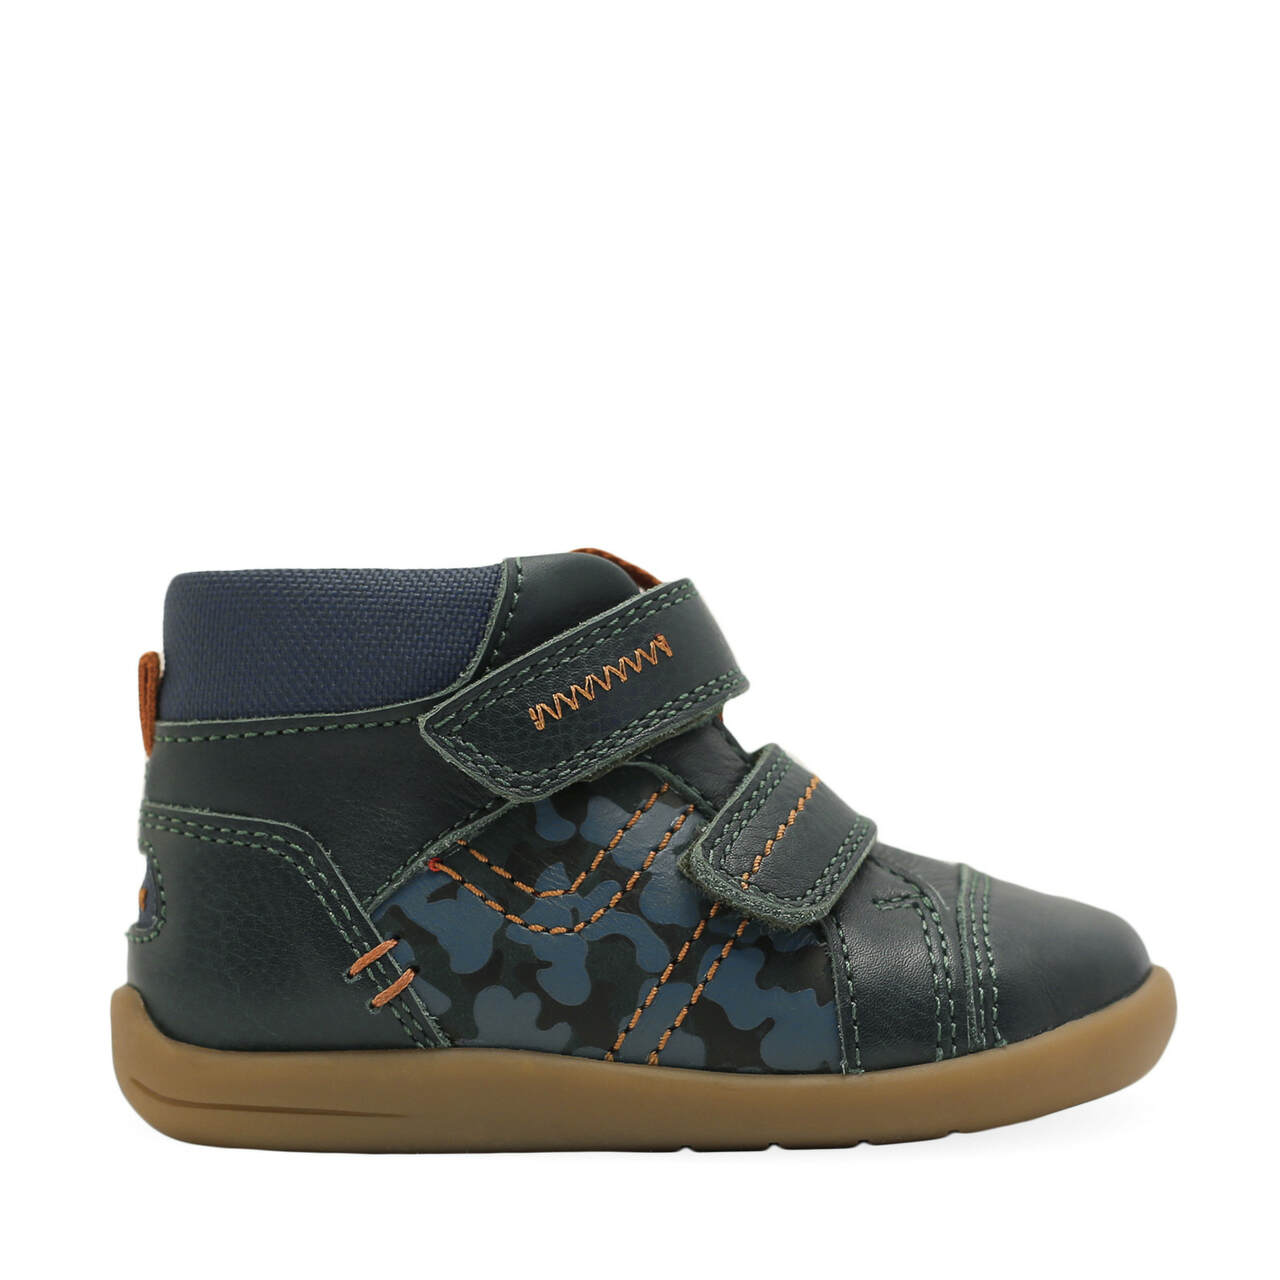 StartRite Adventure 0791_4 Boys Dark Green Leather Touch Fastening Ankle Boots